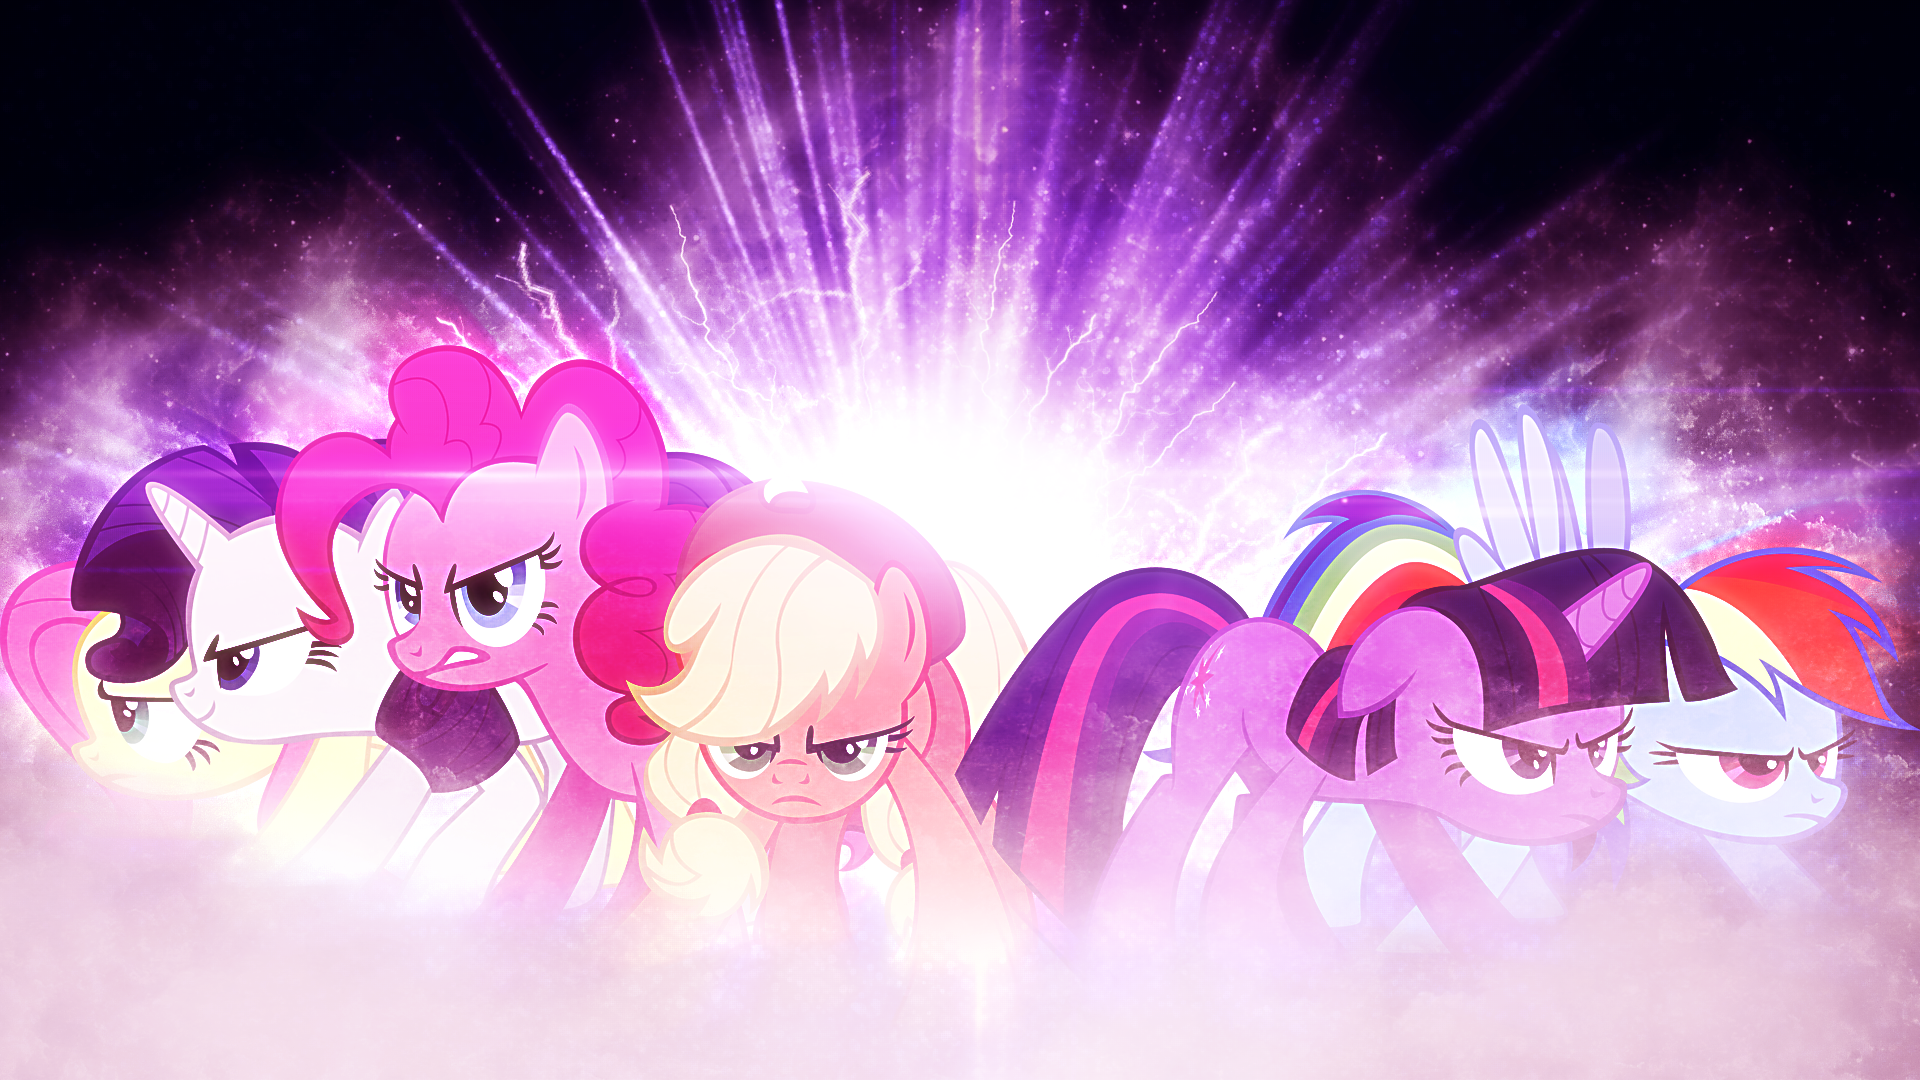 The Mane 6 are Ready to Fight - Wallpaper by CloudshadeZer0 and Tzolkine